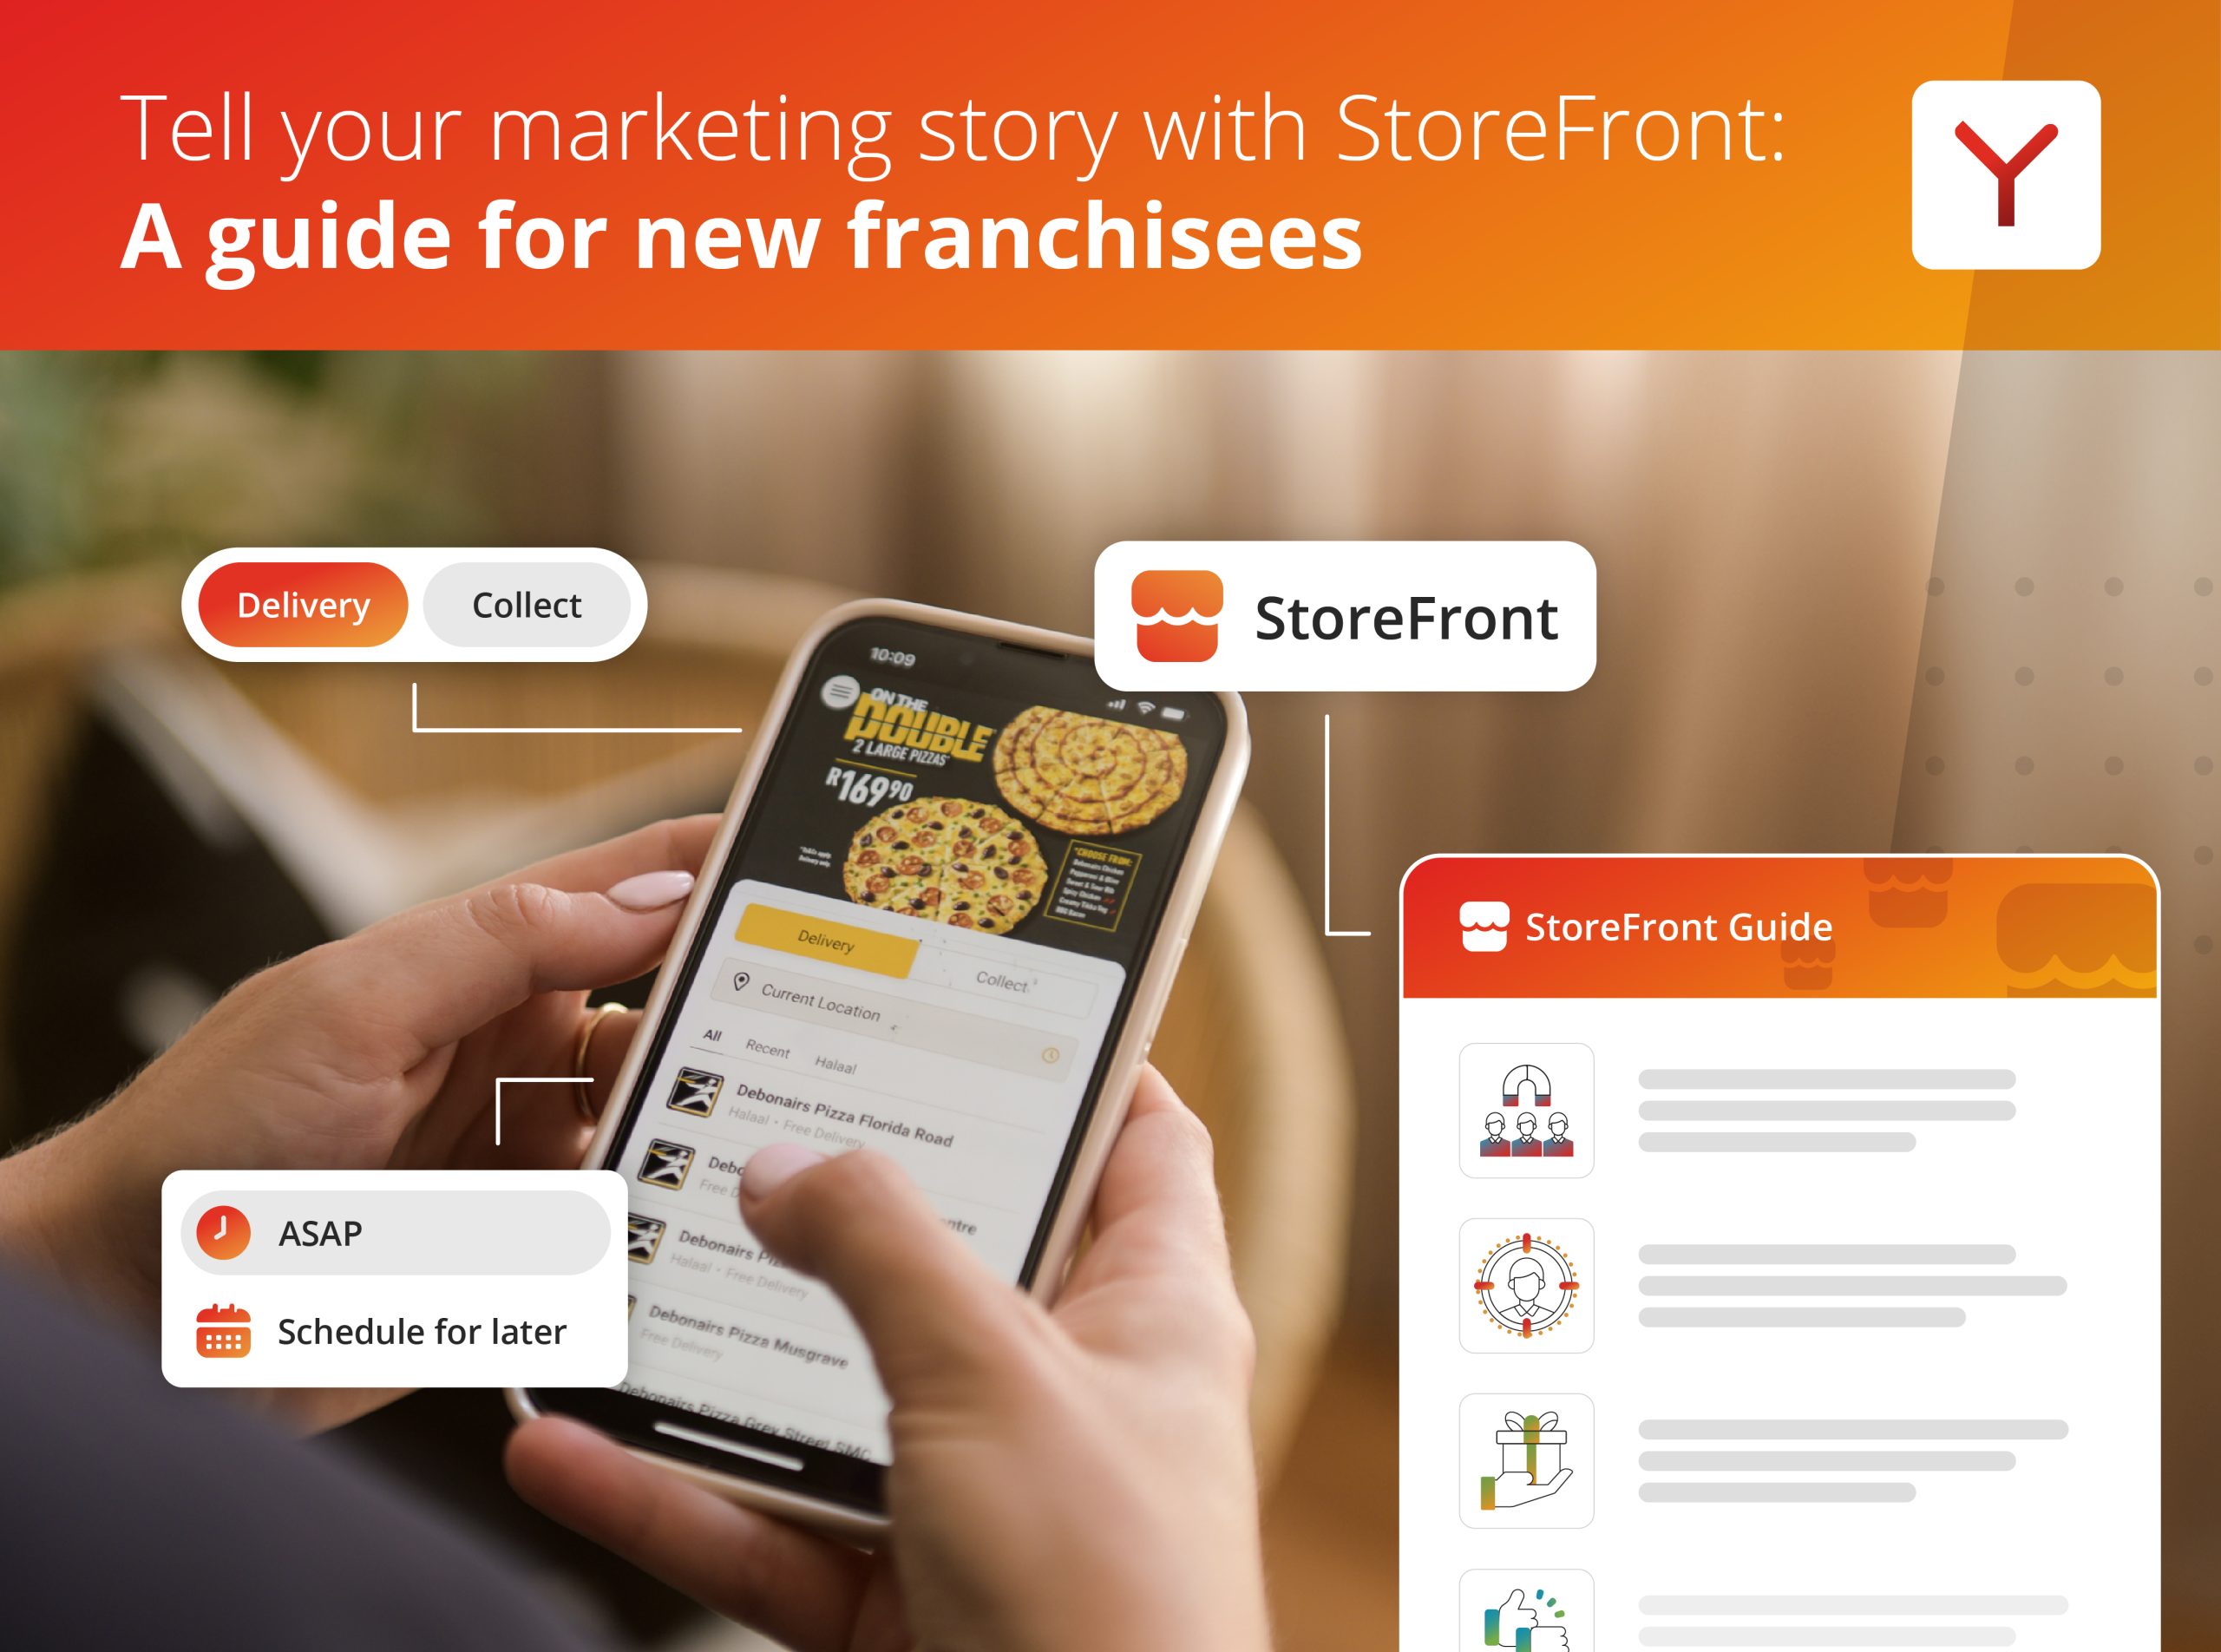 Tell your marketing story with Storefront: A guide for new franchisees